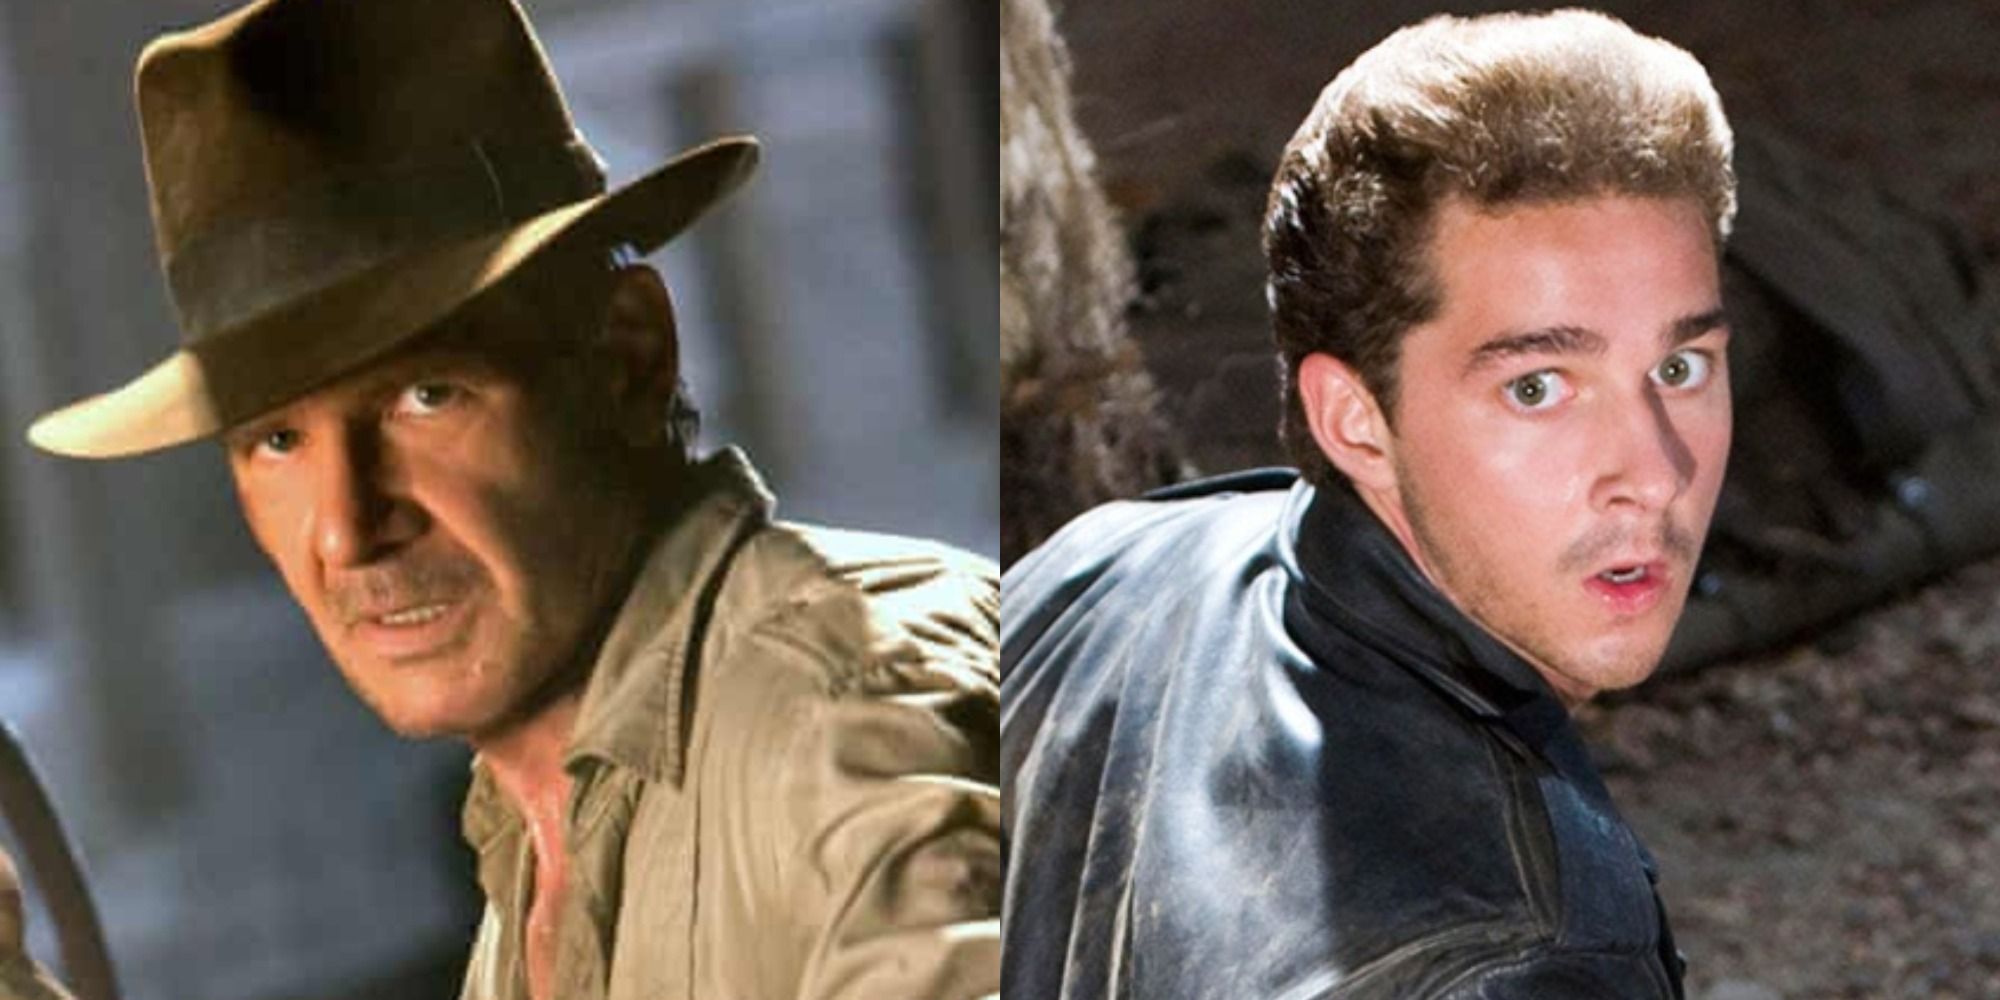 indiana jones and the kingdom of the crystal skull cast